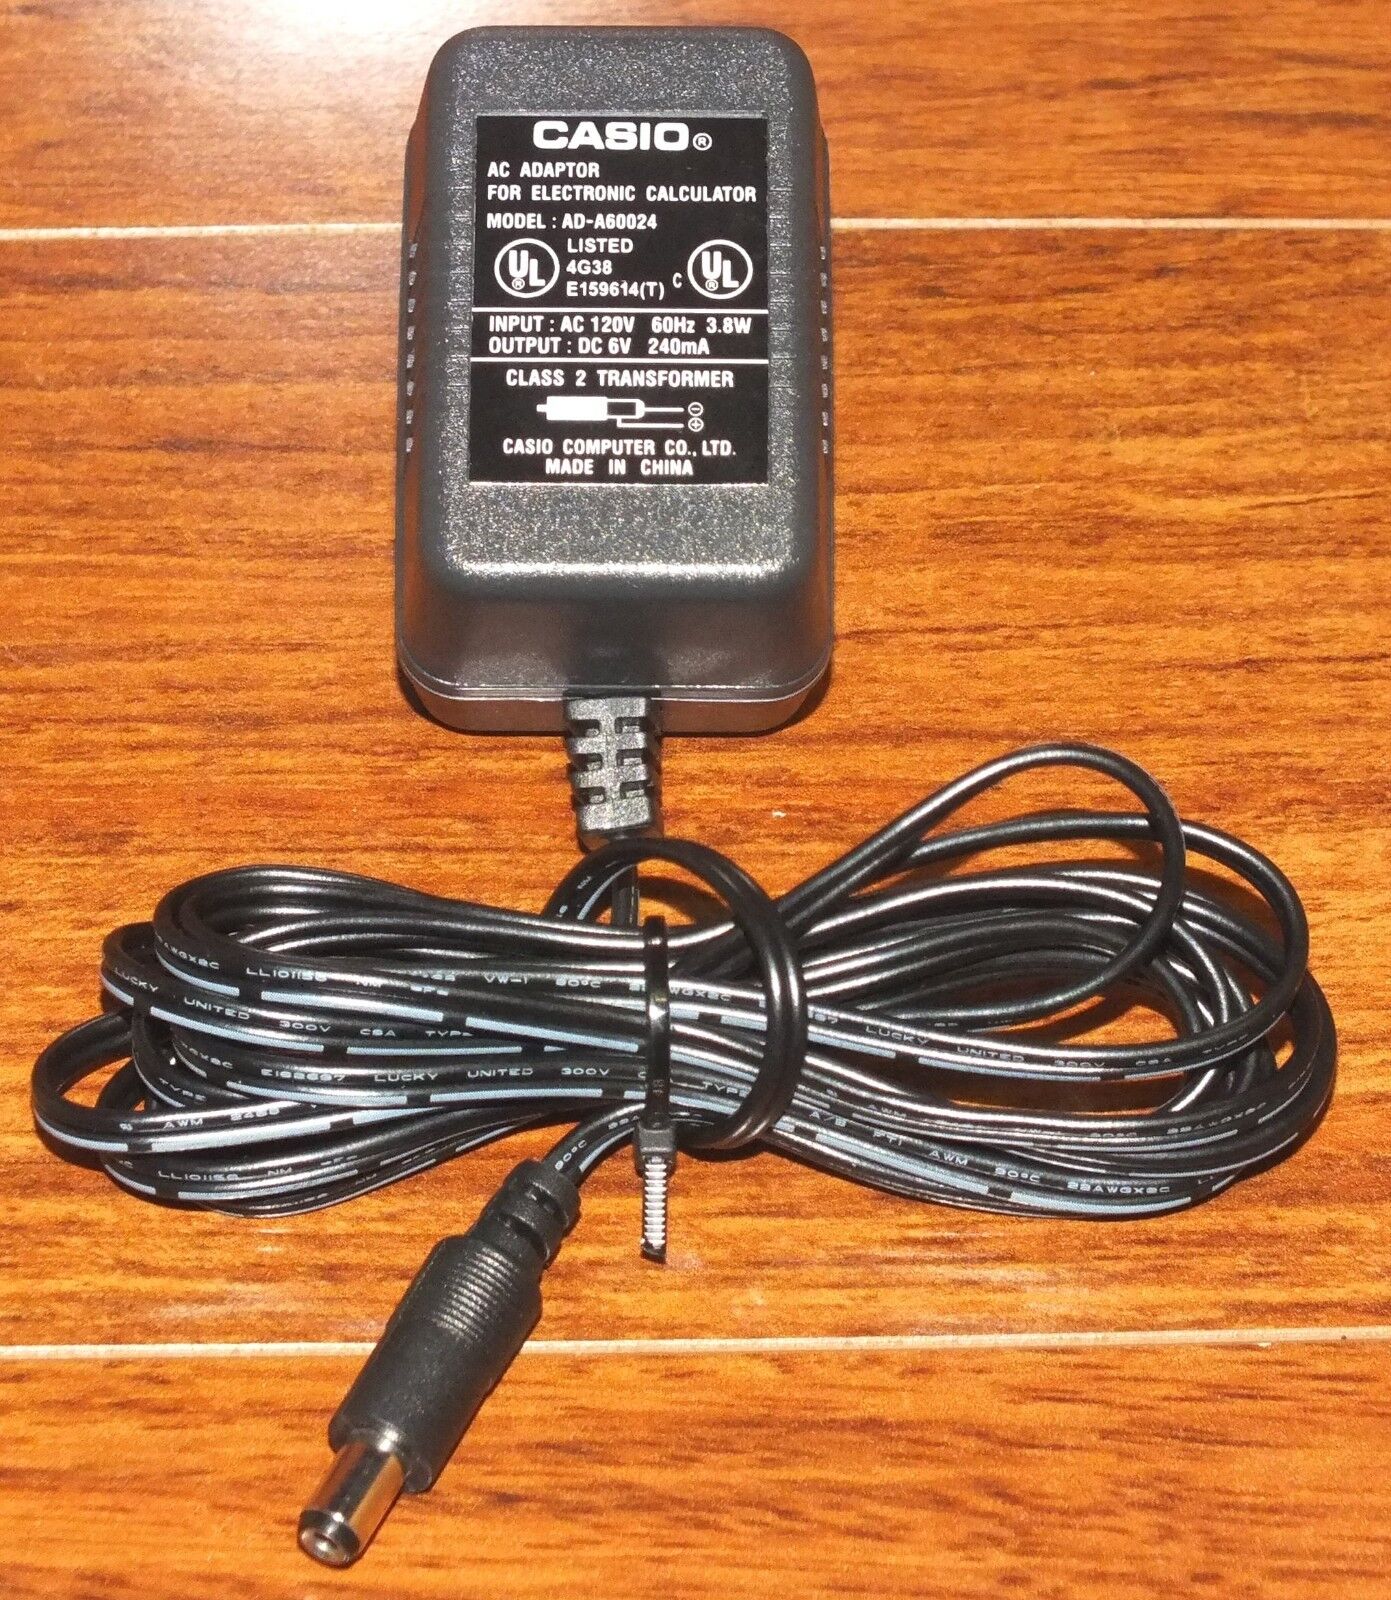 *Brand NEW*Genuine Casio (AD0A60024) DC6V 240mA AC Adapter For Electronic Calculator 120 Volts & 60Hz Power Su